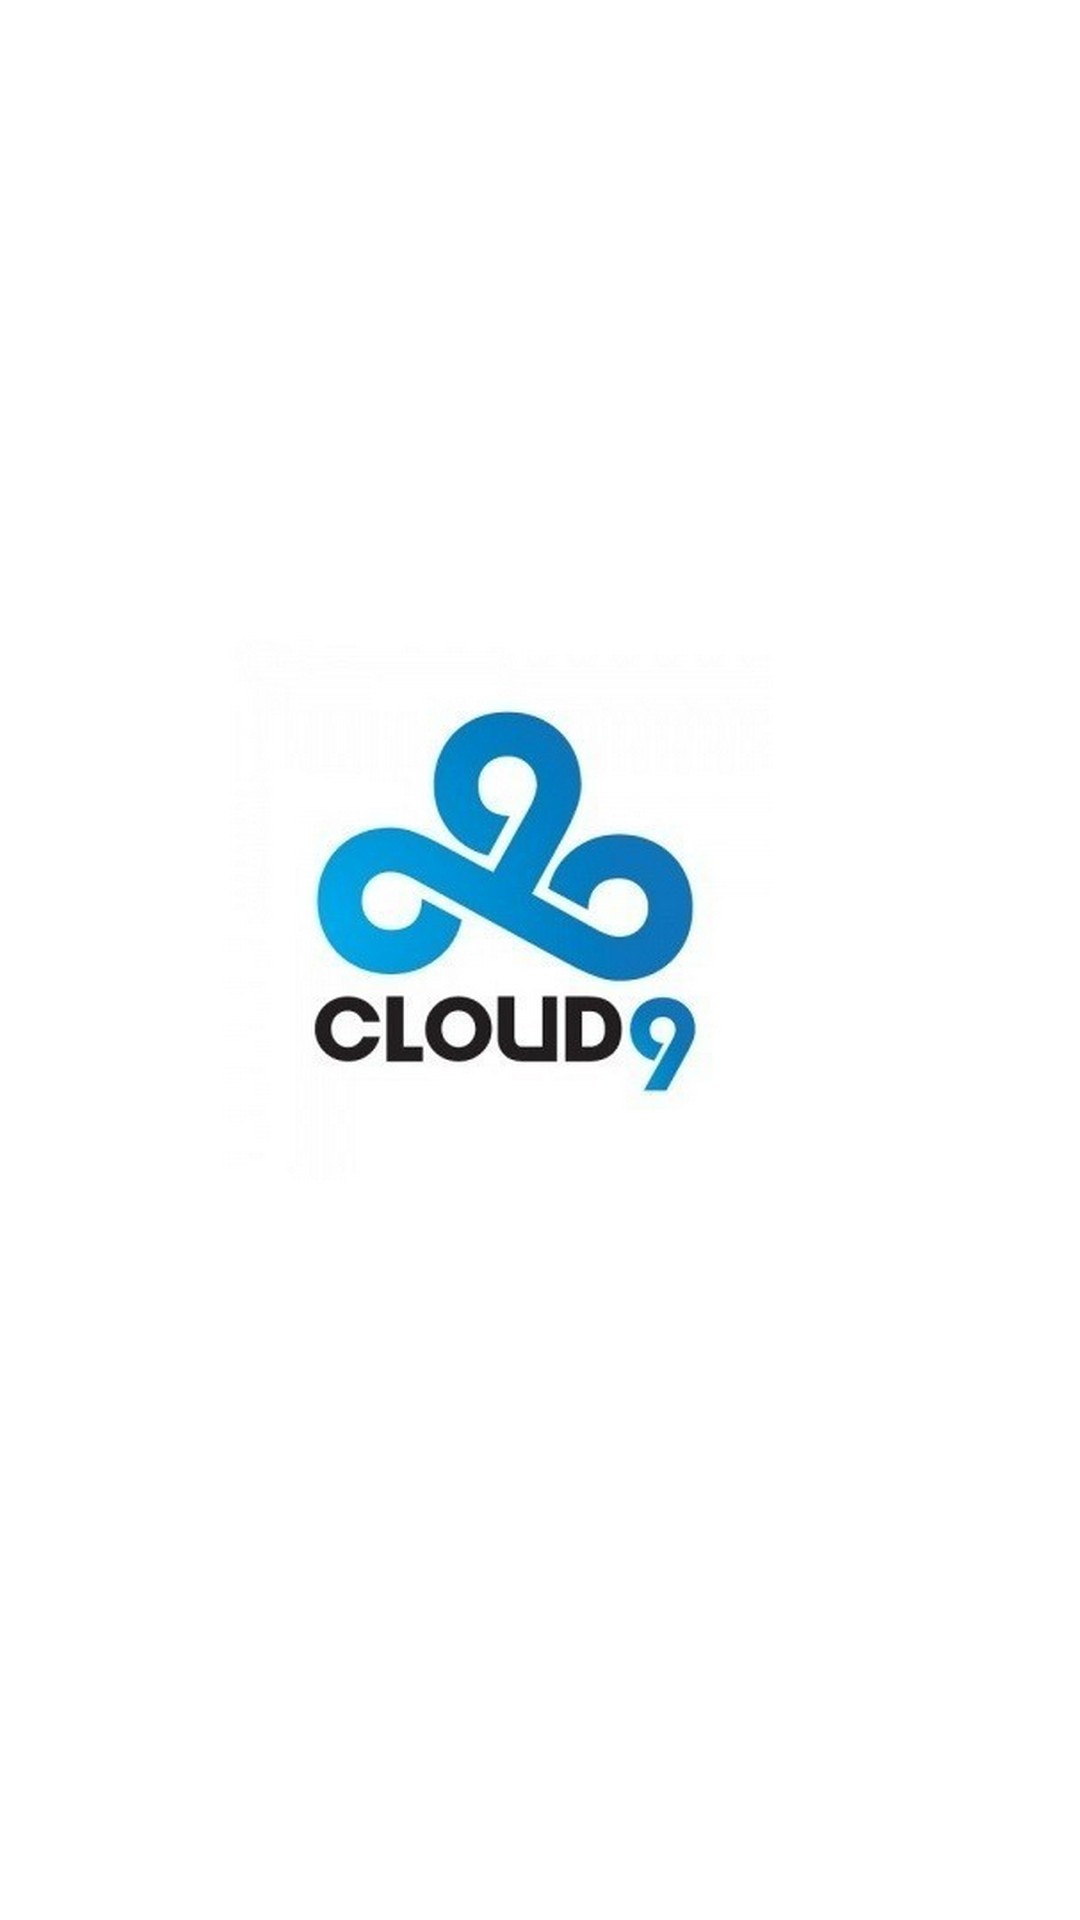 Cloud 9 Wallpaper For Lock Screen With Resolution 1080X1920